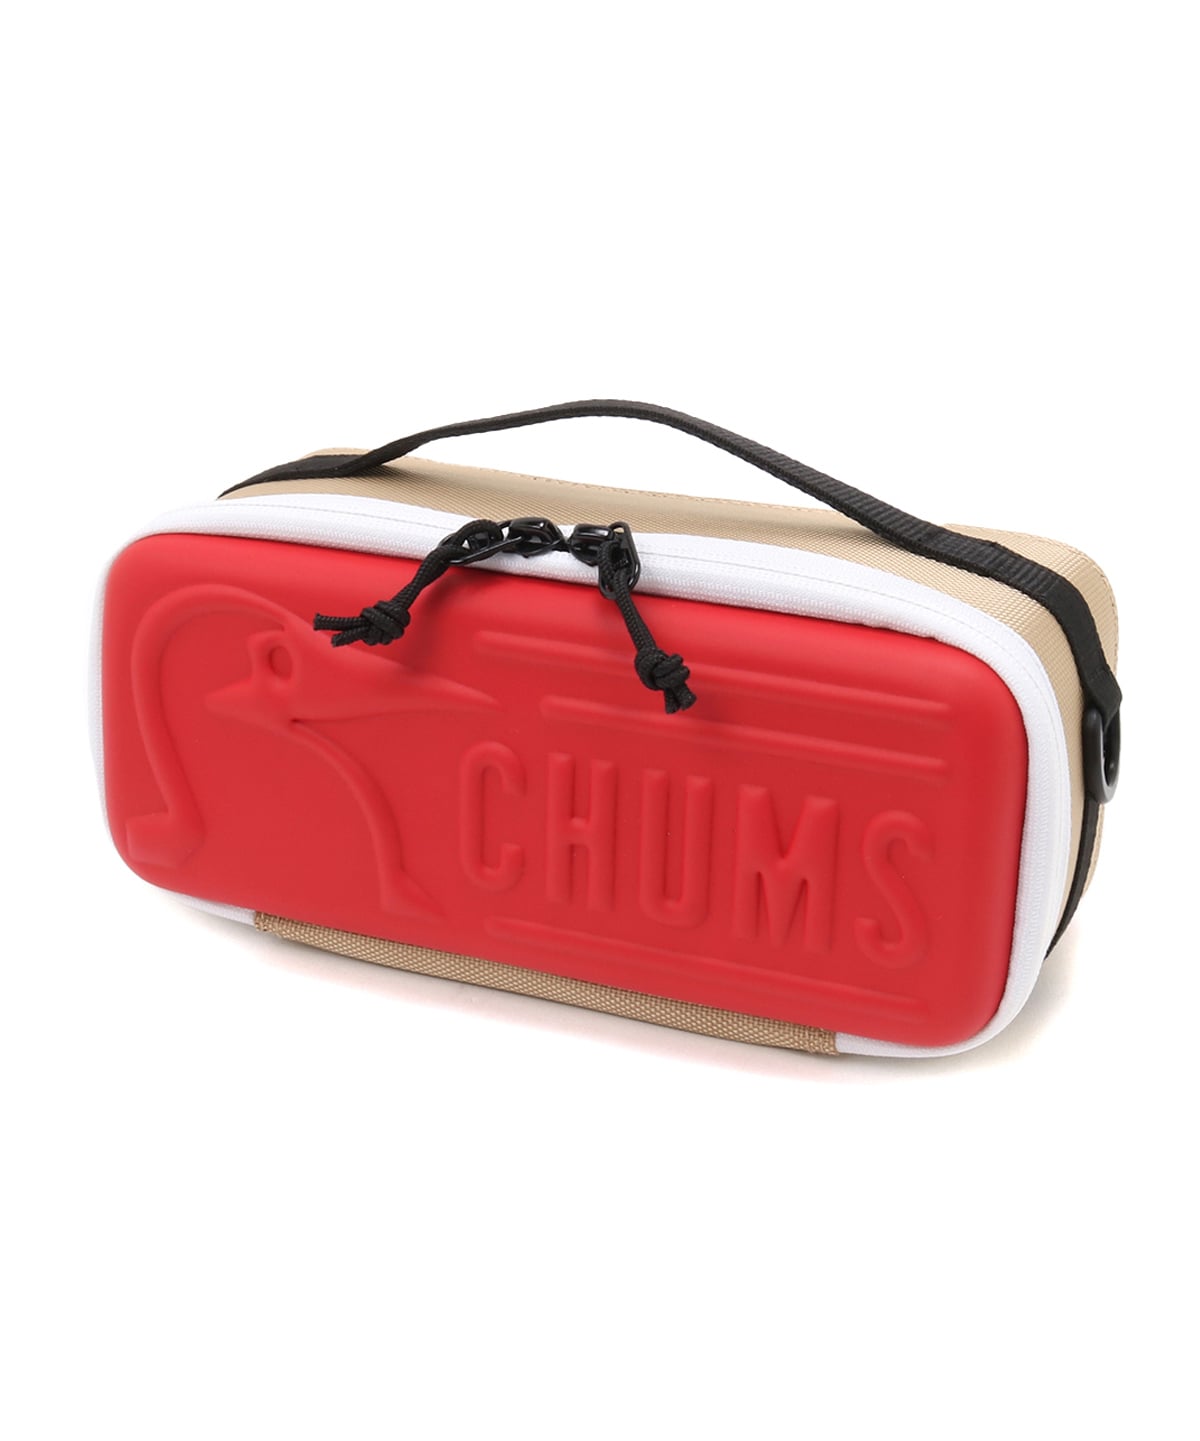 CHUMS BOOBY MULTI HARD CASE S BEIGE / RED